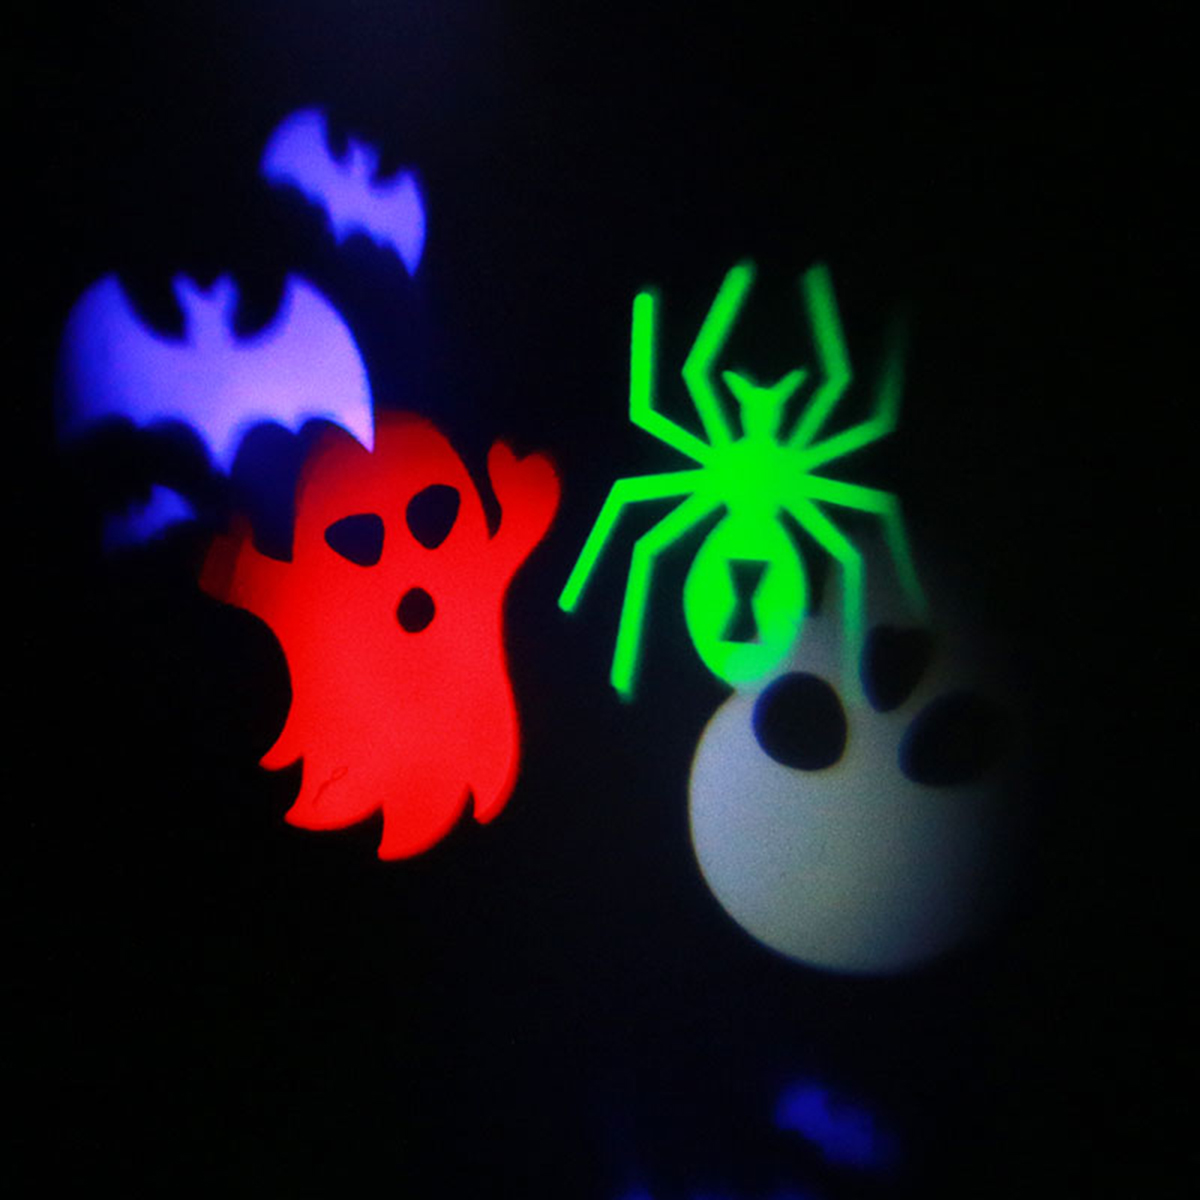 6-Patterns-4W-LED-Stage-Light-Projector-Lamp-Landscape-Garden-Decor-for-Halloween-Christmas-Decorati-1193828-9